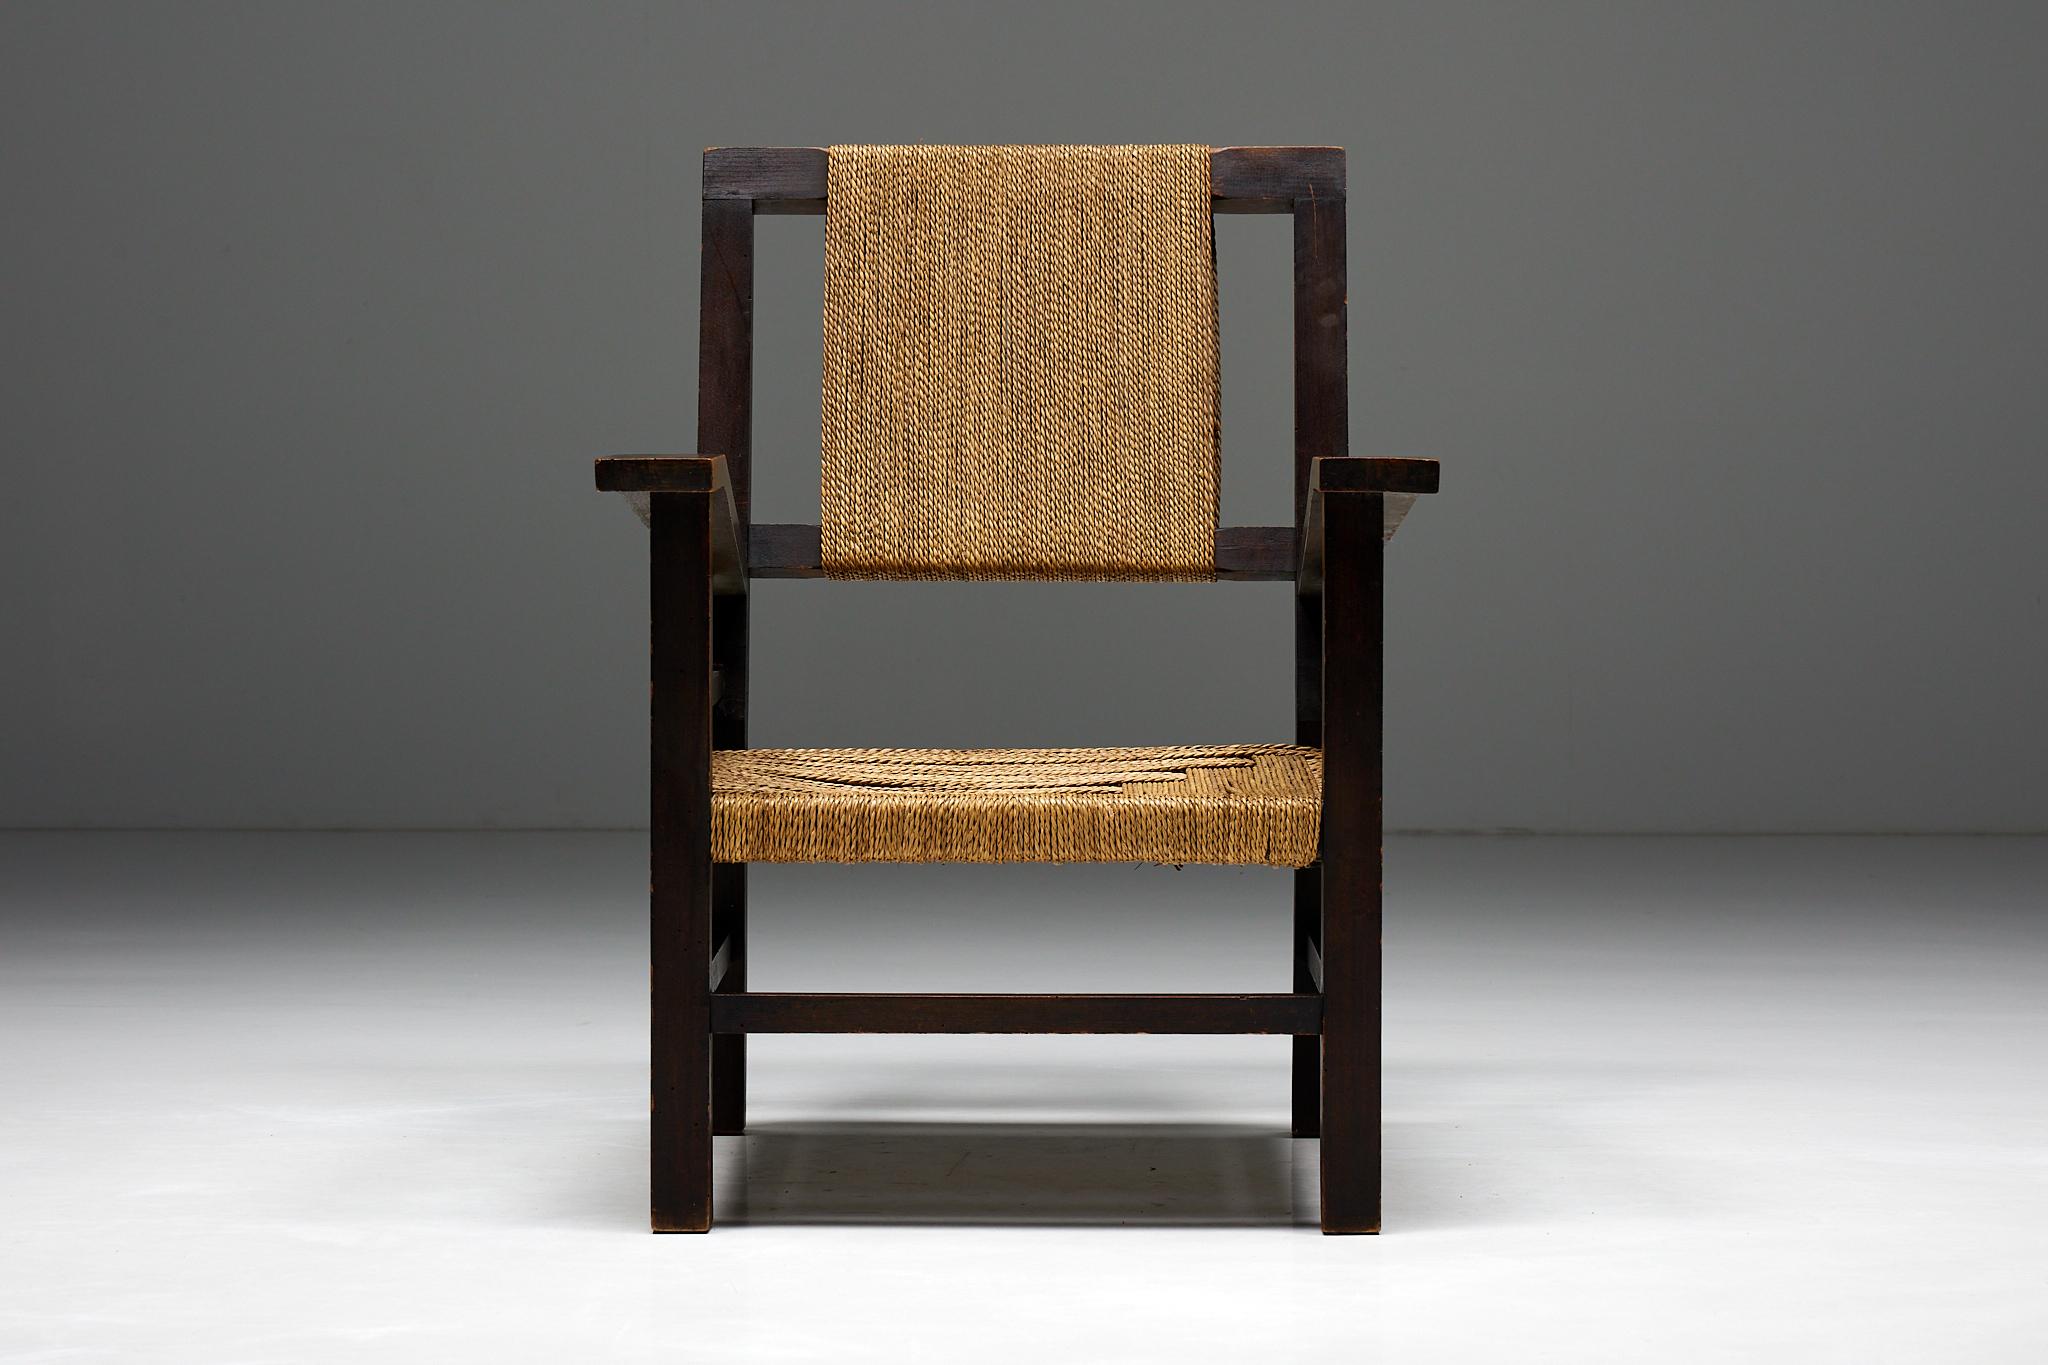 Francis Jourdain; 1930s; Early 20th Century; Les Ateliers Modernes; Wabi Sabi; Rustic; Cord; Simple Design; Le Corbusier; Paris; Armchair; Easy Chair; Monoxylite;

Easy chair in solid wood and rope, crafted in the 1930s. Meticulously handcrafted